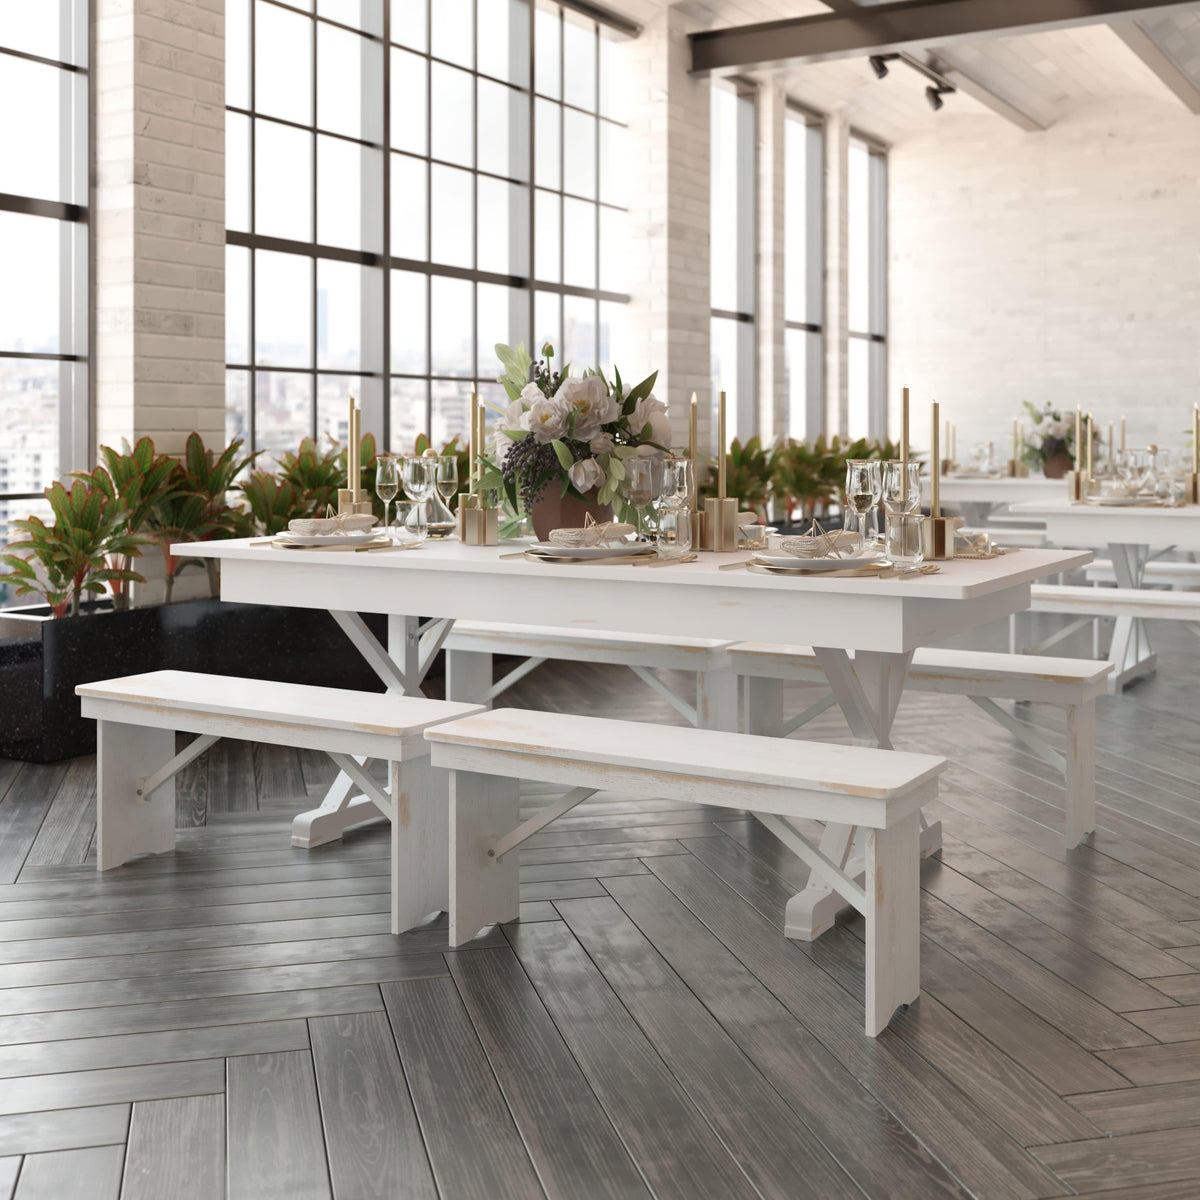 Antique Rustic White |#| Solid Pine Farm Dining Table with X-Style Legs in Antique Rustic White-7' x 40inch